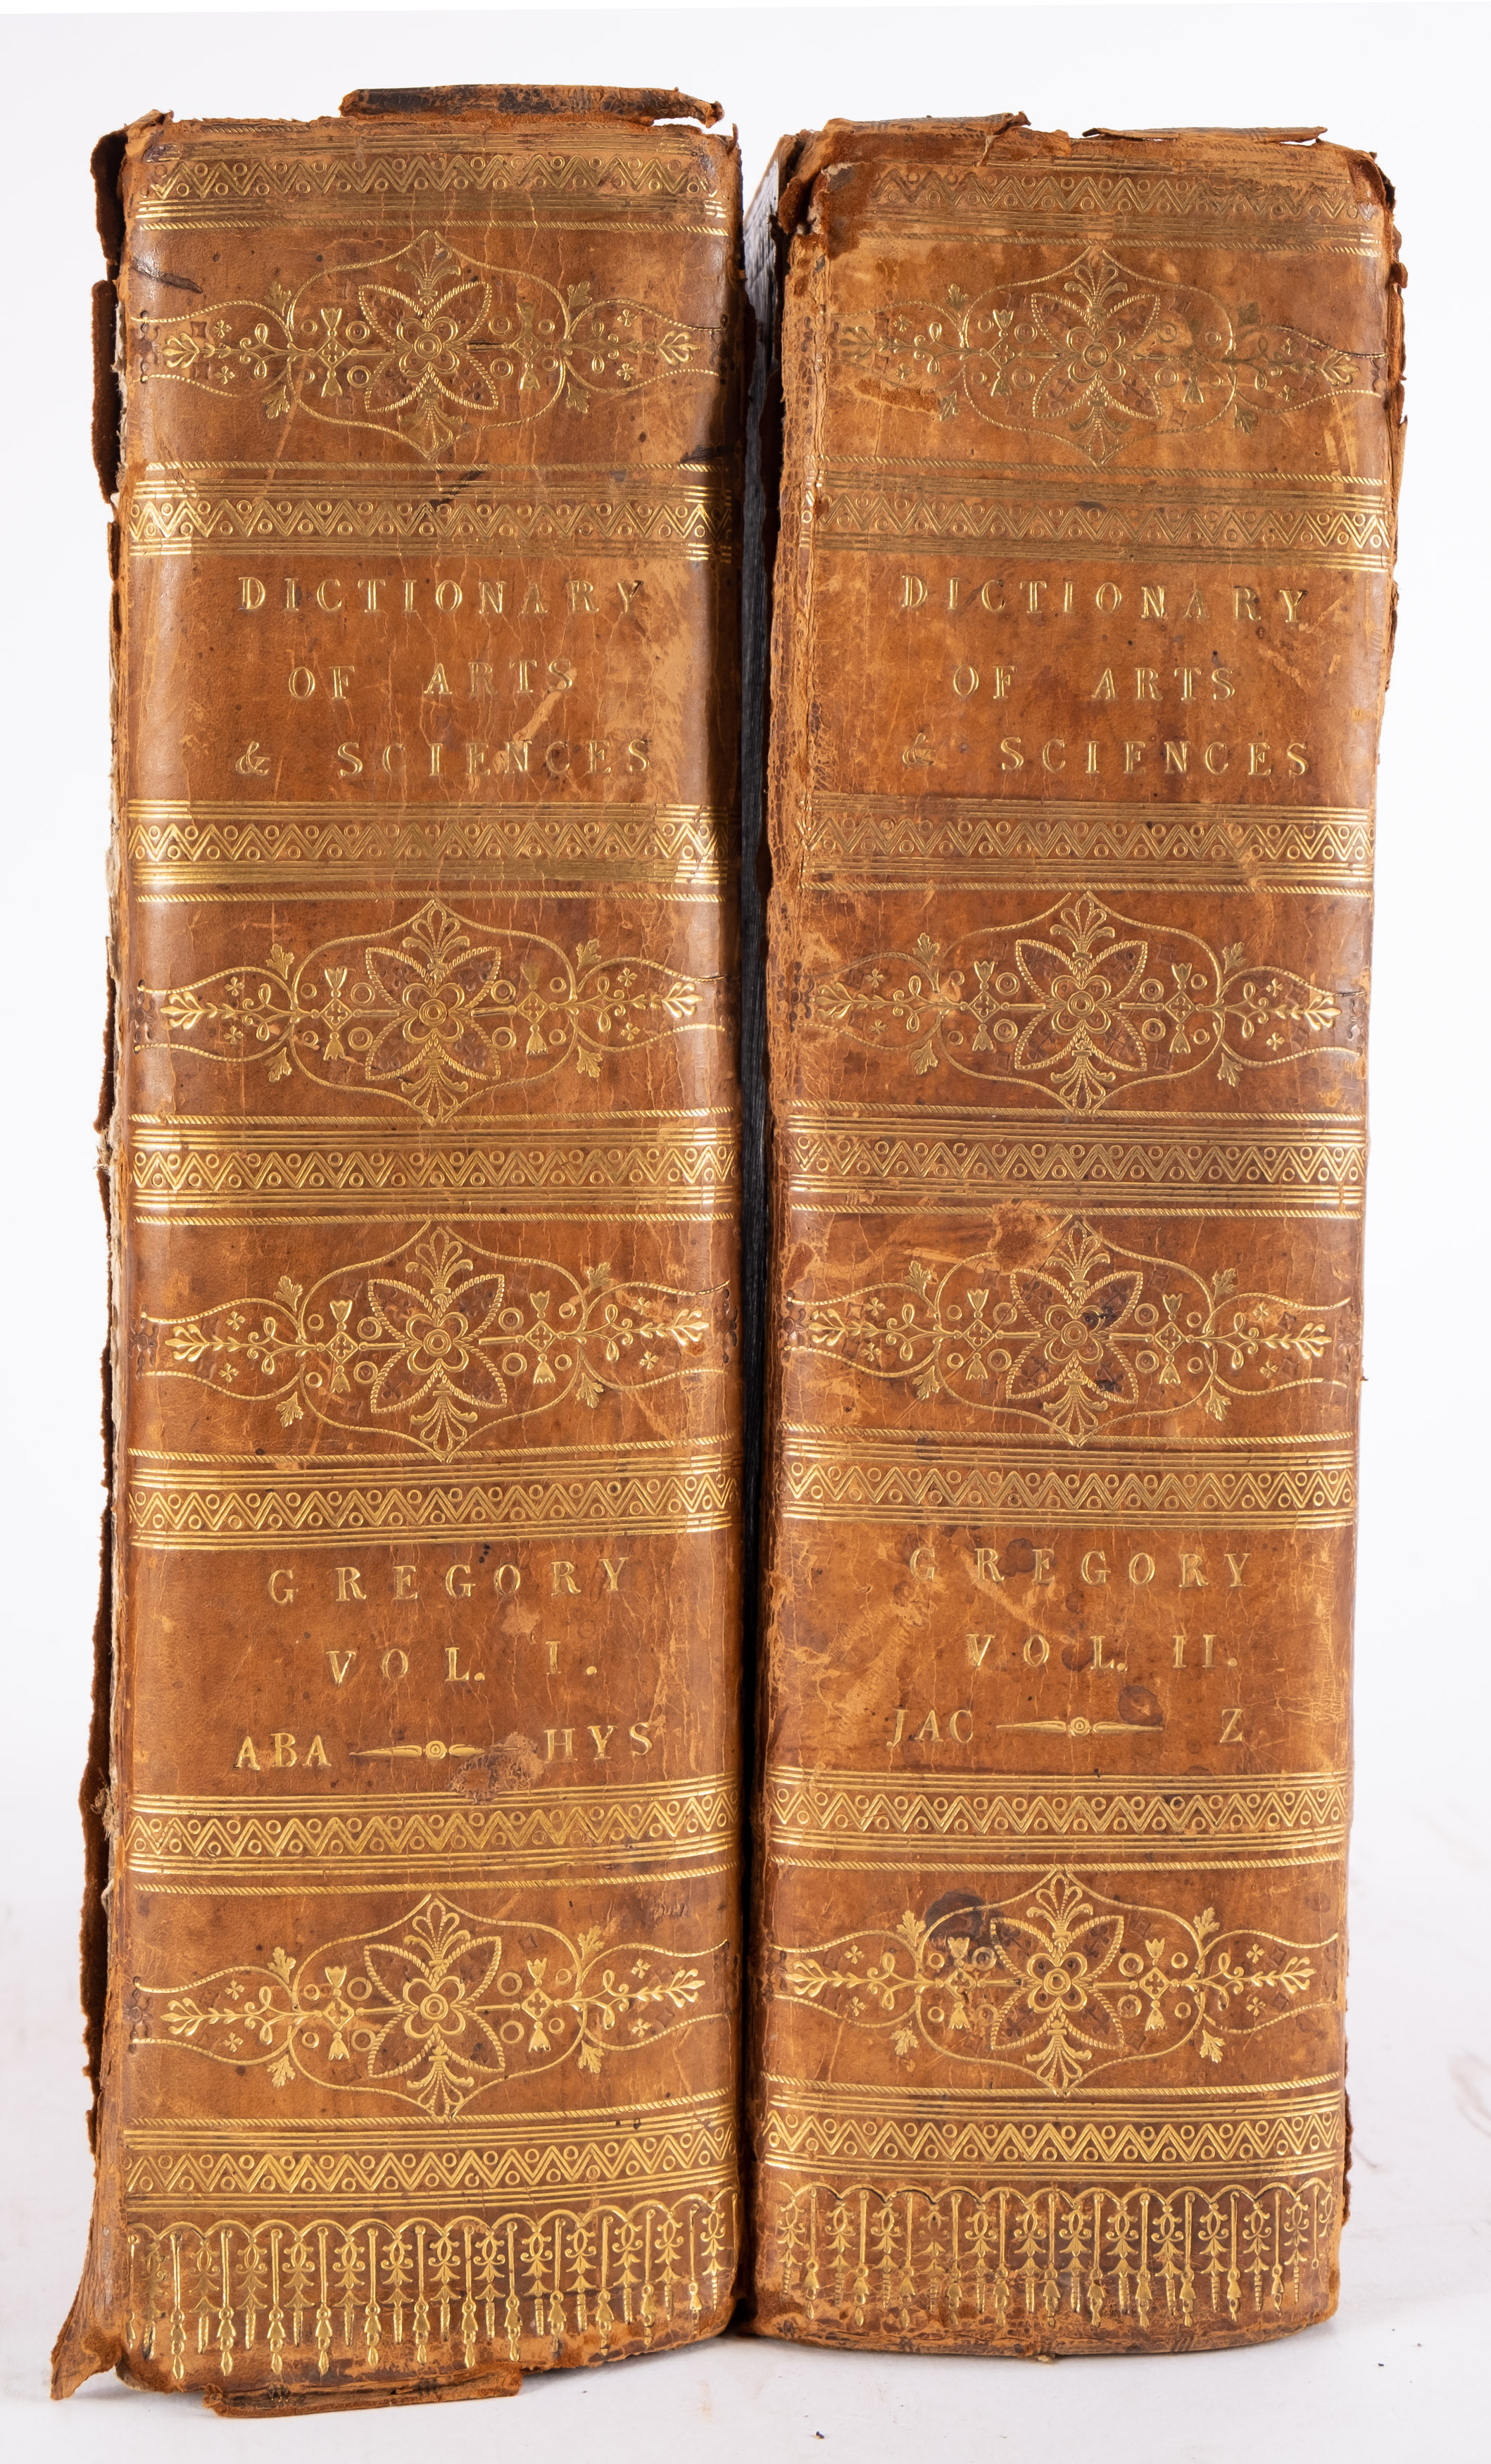 GREGORY, G - A Dictionary of Arts and Sciences : 2 vols. Numerous copper plates throughout.